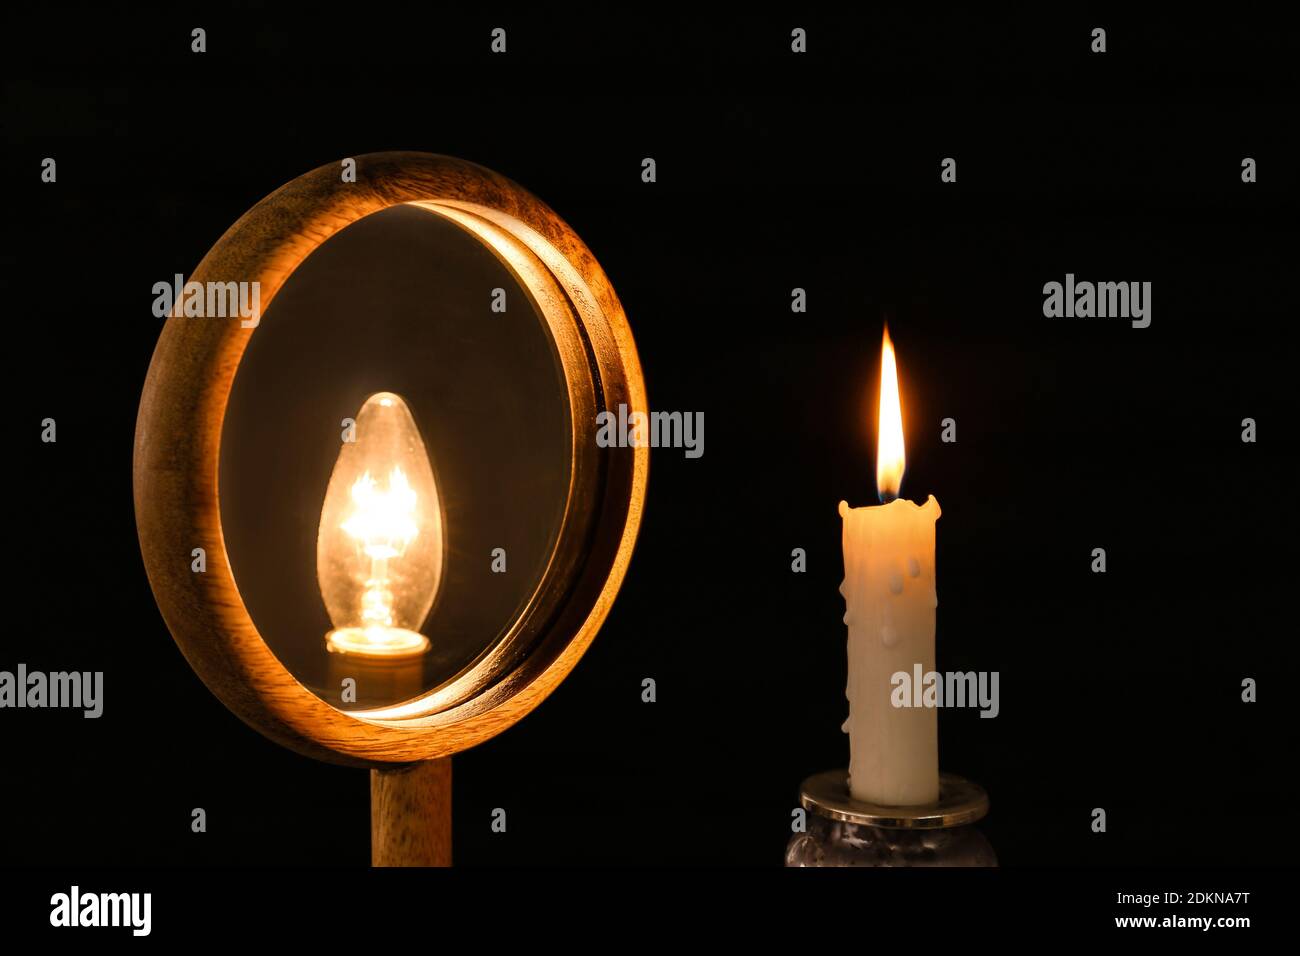 Candle looking at its reflection in mirror on dark background Stock Photo